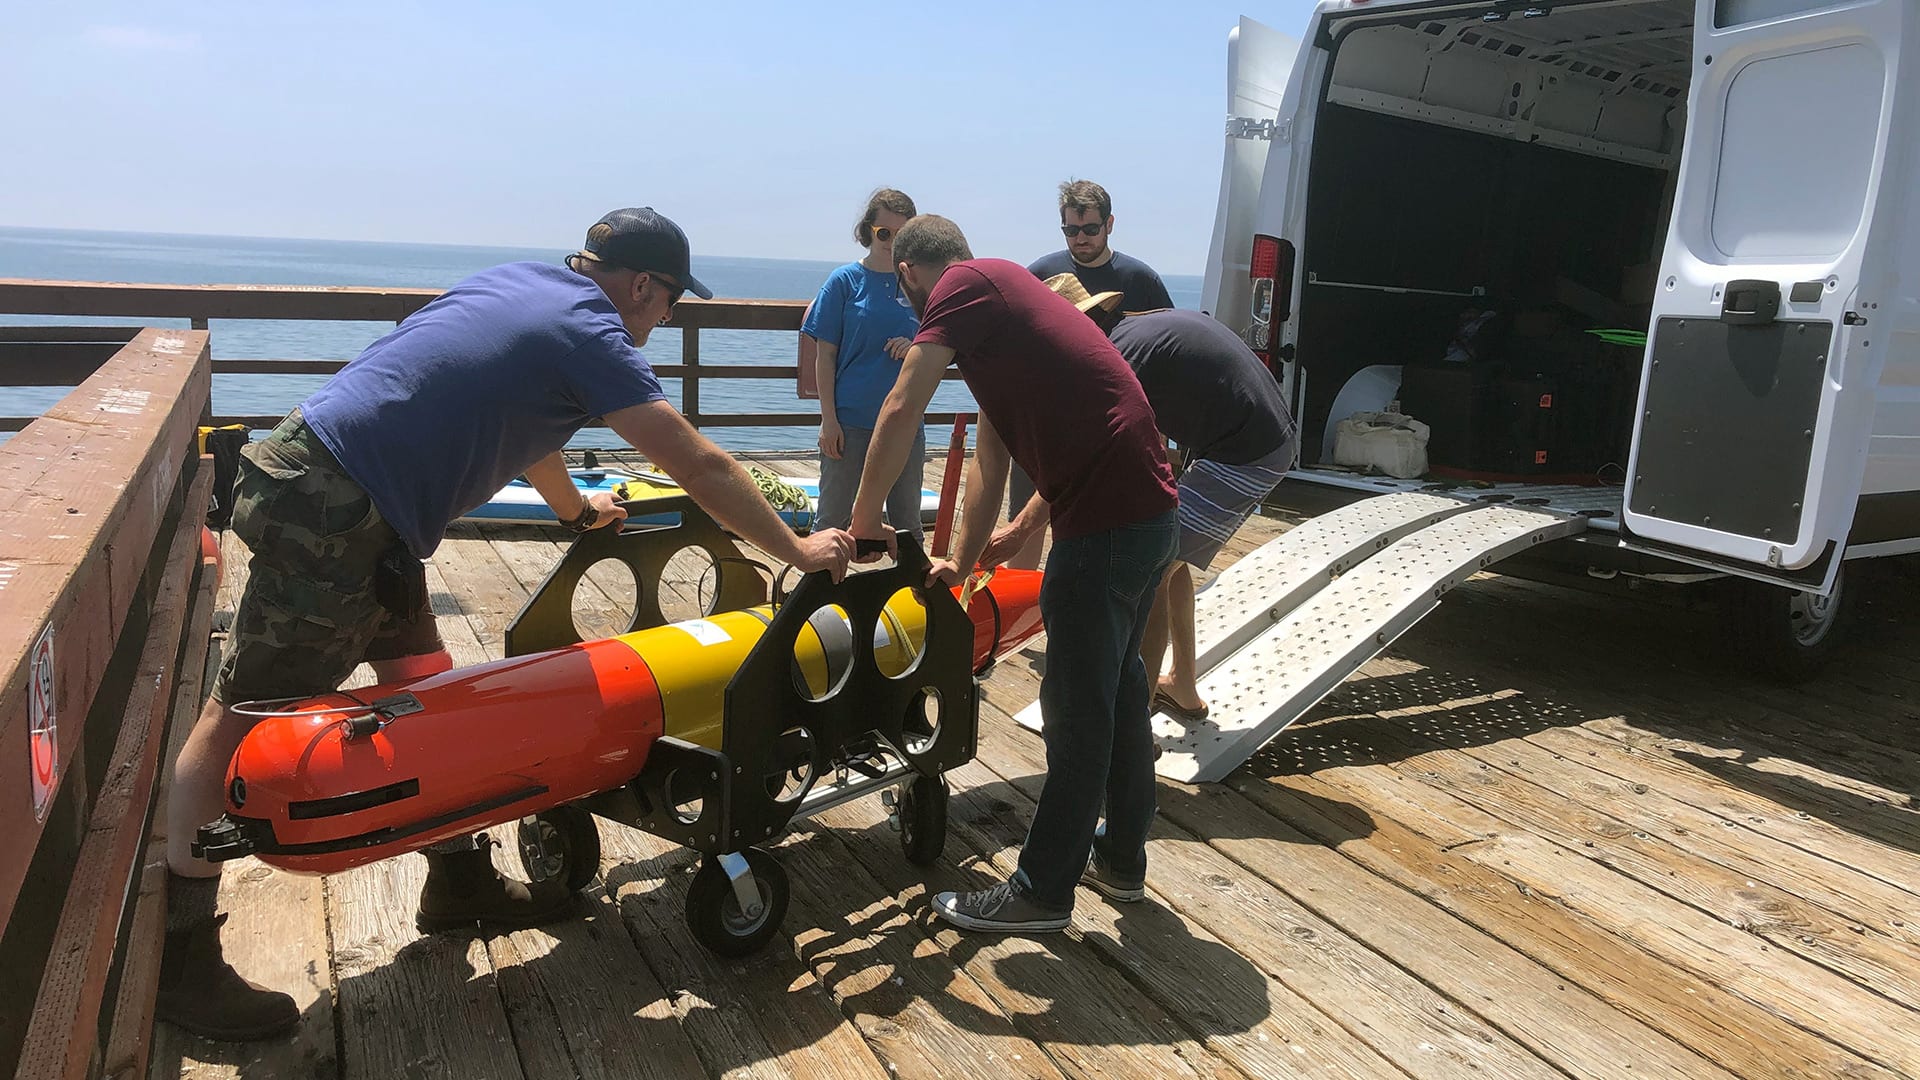 Researchers get the LRAUV ready to deploy for the simulated oil spill response drill. WHOI’s strength in marine operations and logistics, combined with the vehicle’s small form factor and easy-to-handle design, will enable quick mobilization in the event of an oil spill incident. (Photo by Amy Kukulya, Woods Hole Oceanographic Institution)